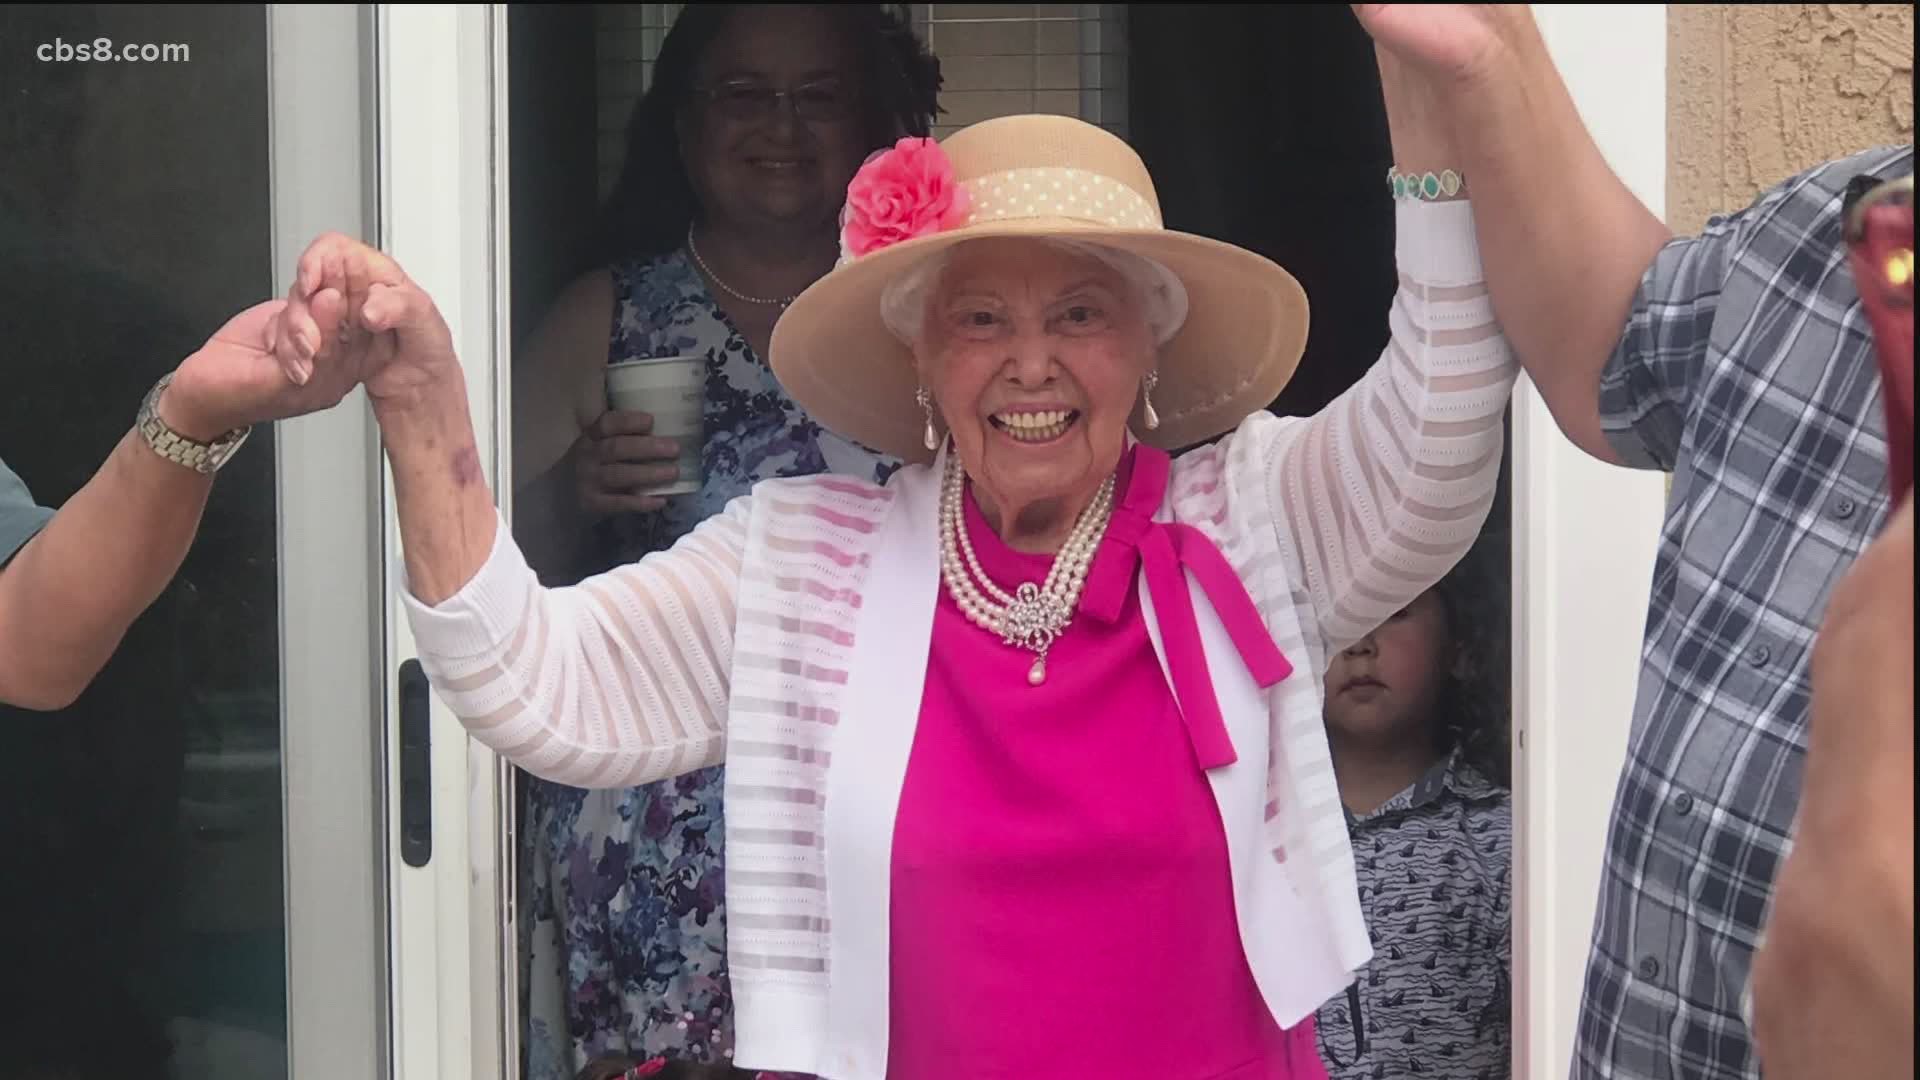 Over 100 years of life is a lot to celebrate and for one San Diego woman she was able to make the most of a very special birthday in a way she never thought possible